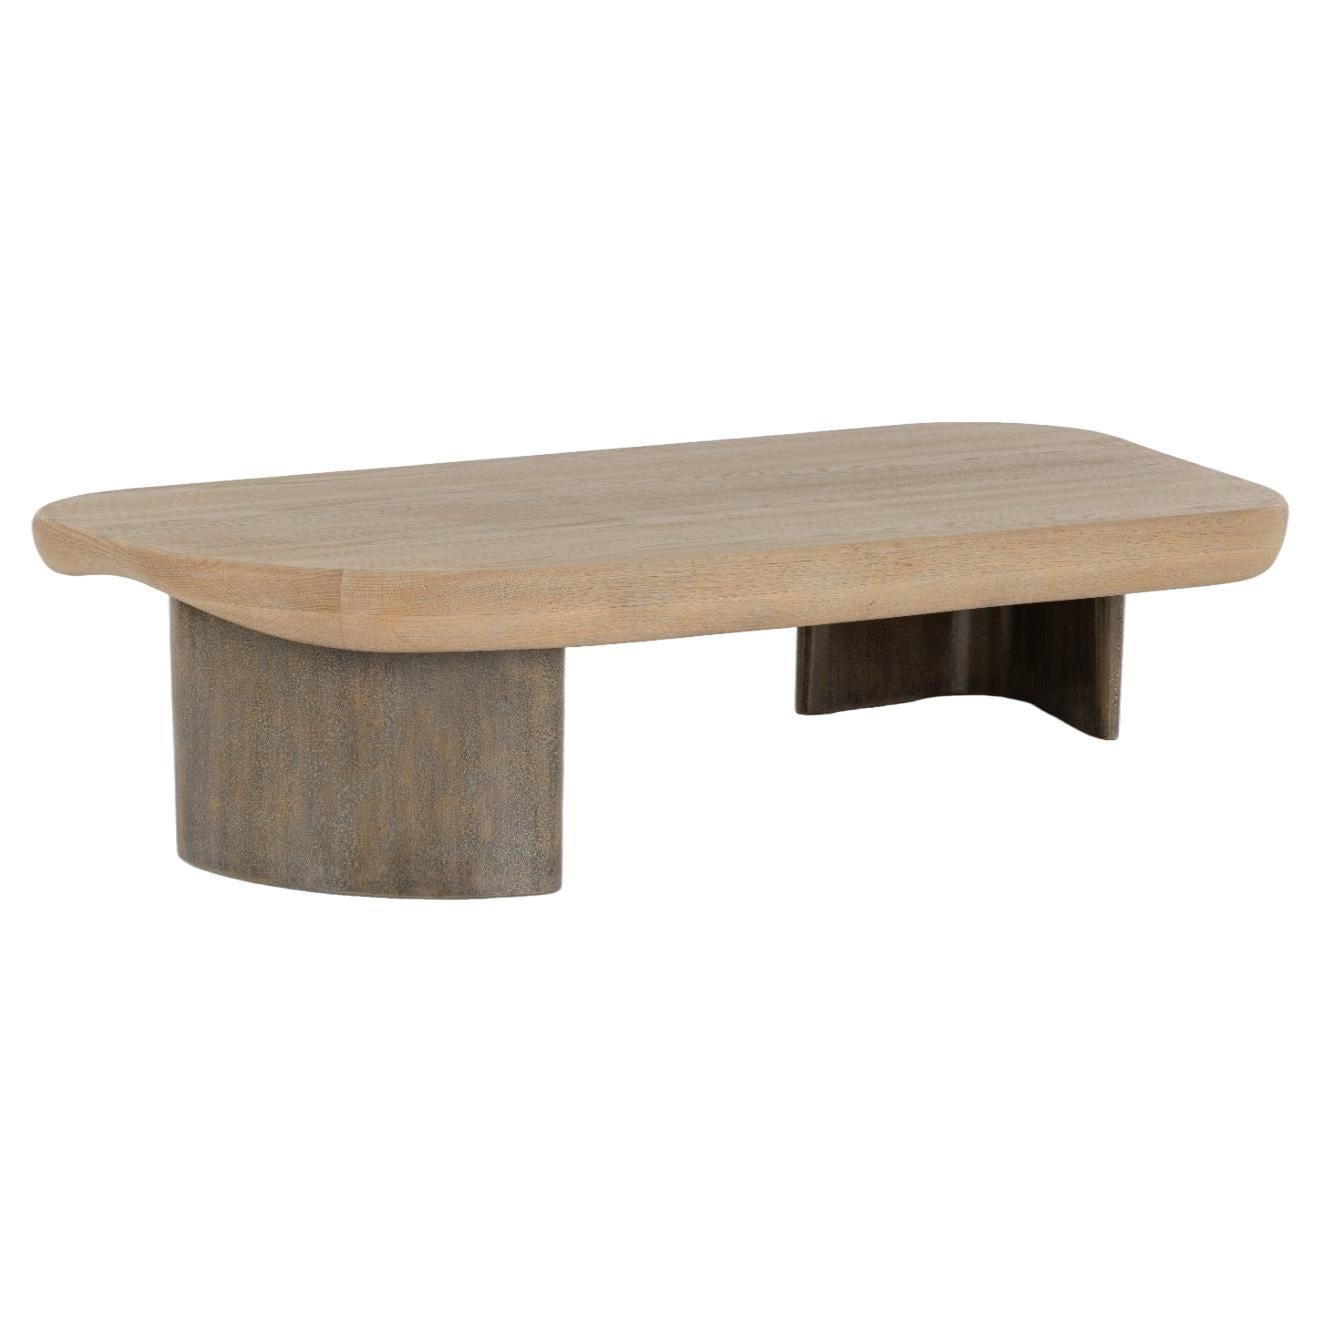  Coffee Table, Oak Top, Handmade Textured Lacquered Wood Base, Ocean